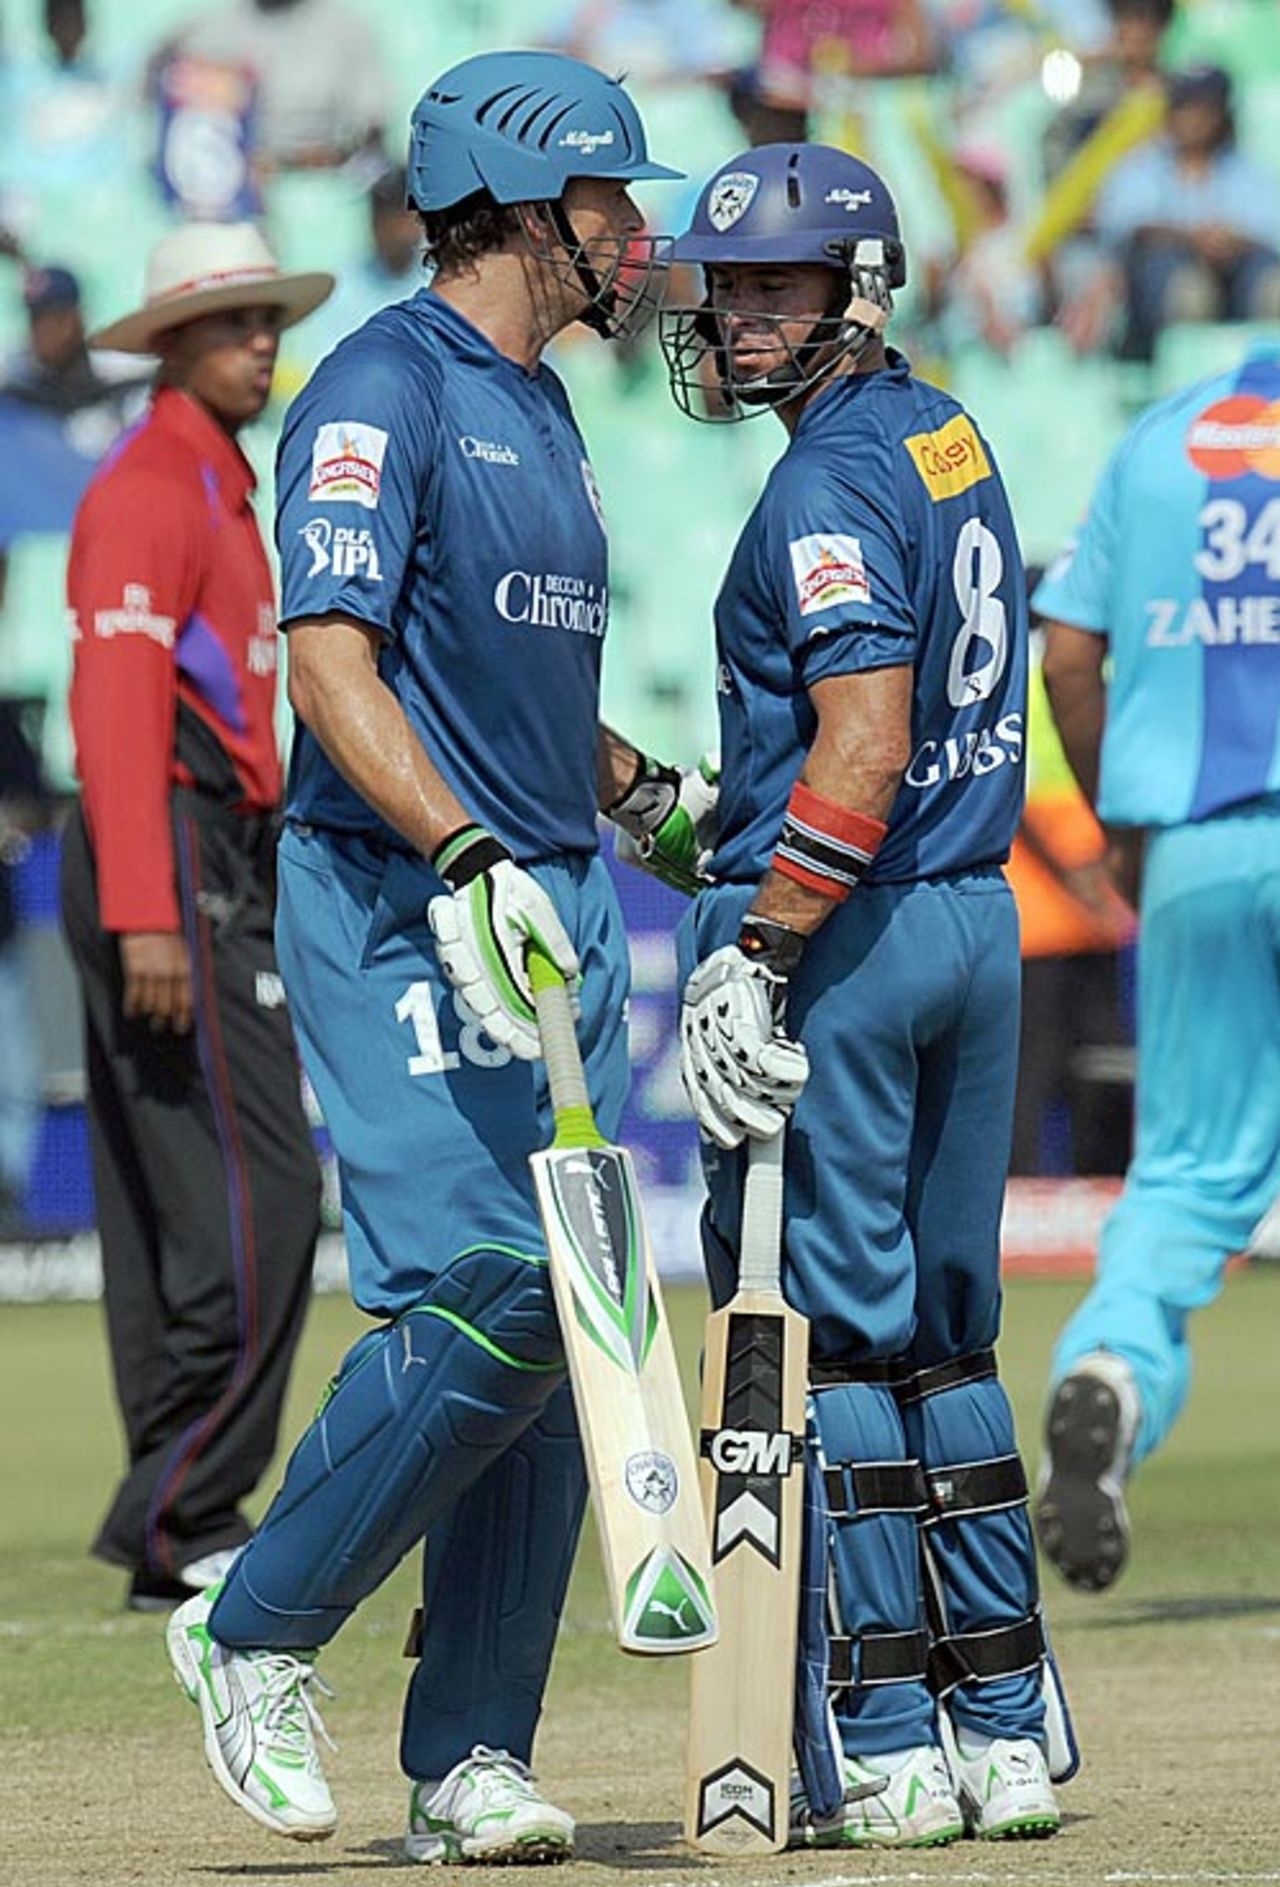 Adam Gilchrist and Herschelle Gibbs added 63 in quick time, Deccan Chargers v Mumbai Indians, IPL, 12th Match, Durban, April 25, 2009